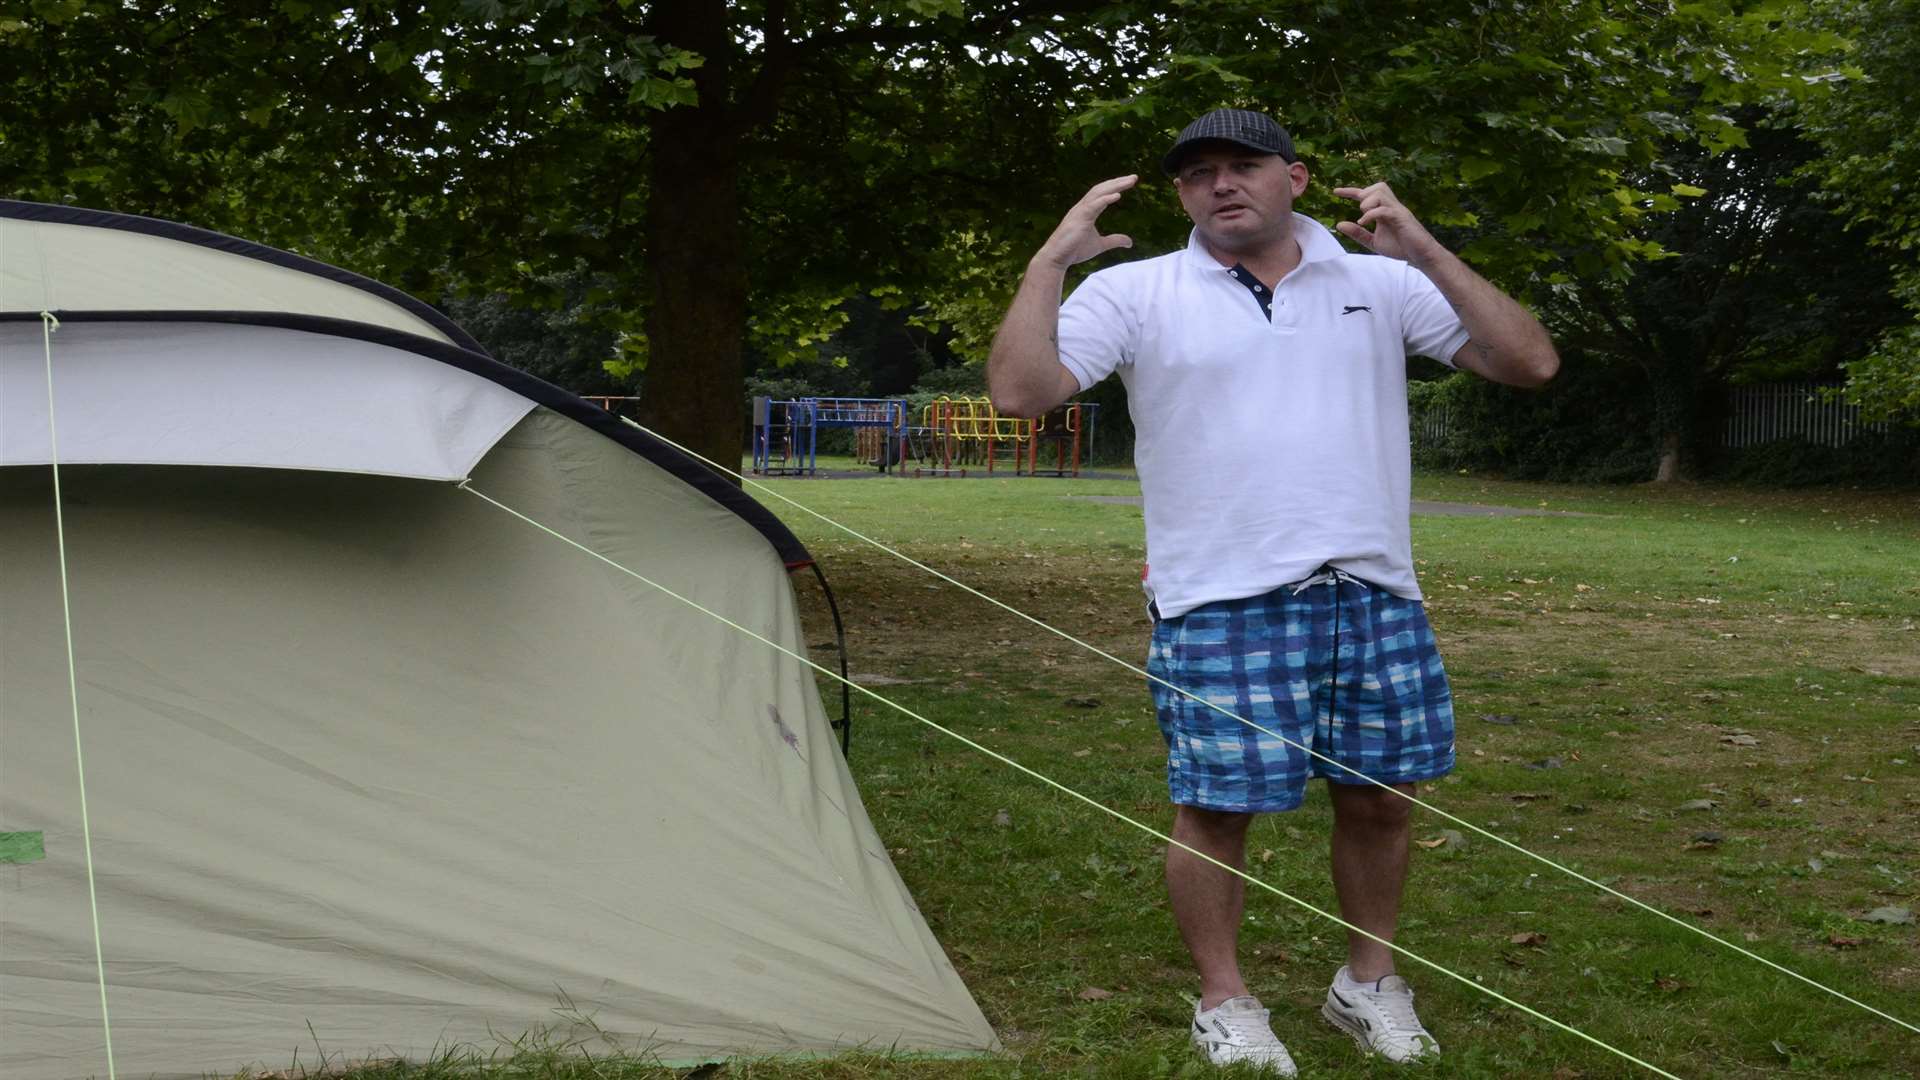 Neighbours have complained to the police about the man living in the tent